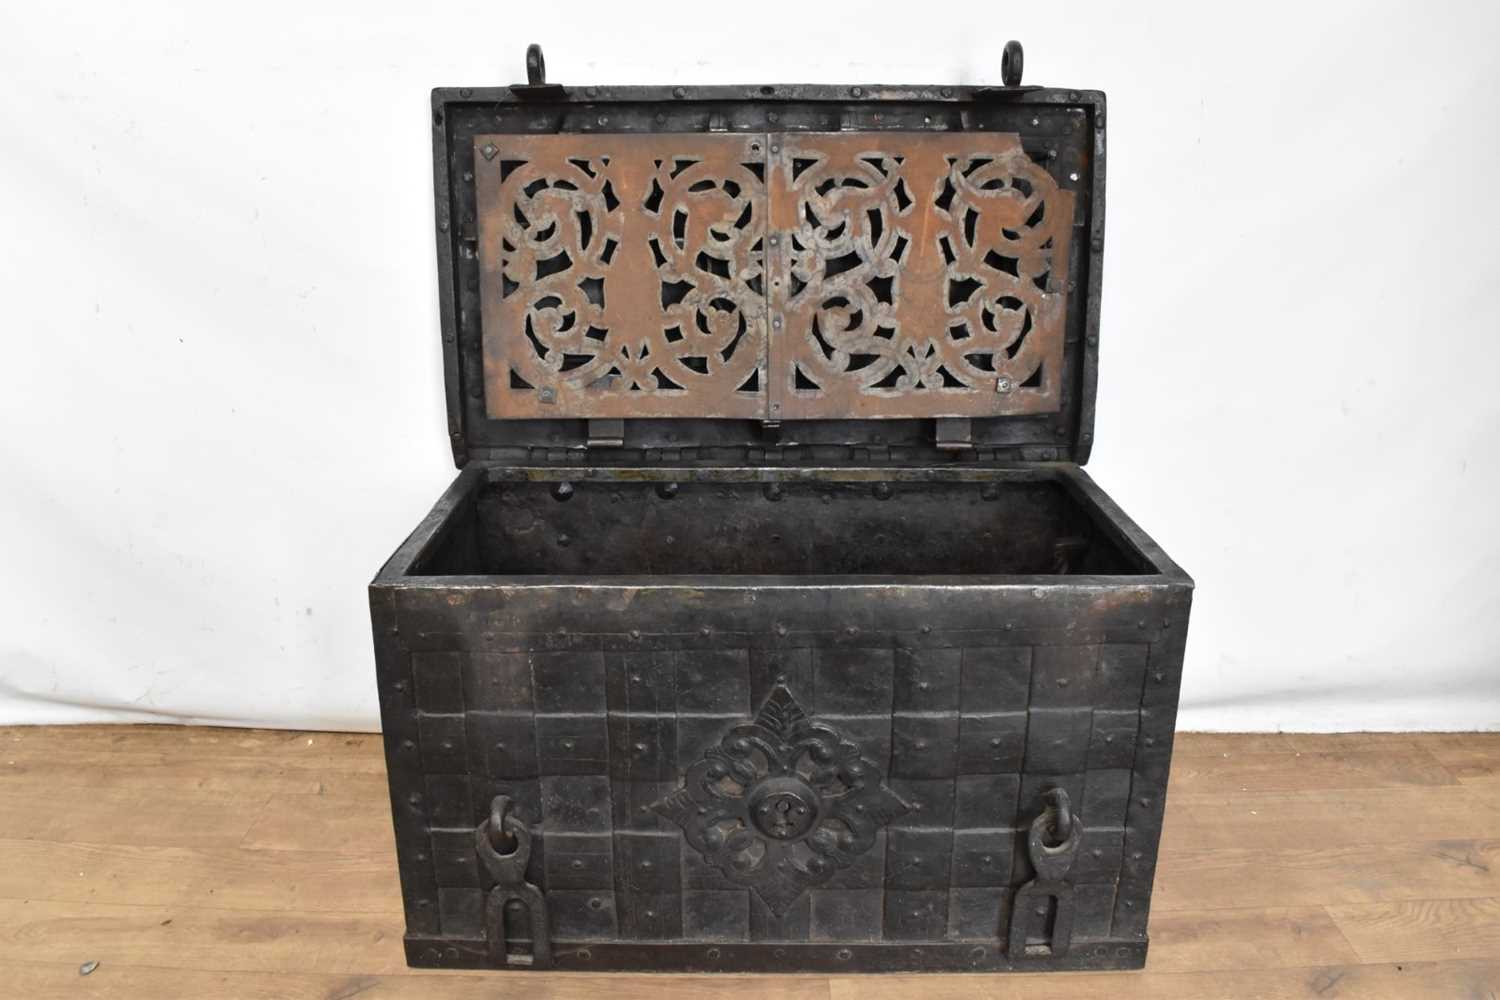 17th century German iron Armada chest with intricate locking system, key marked S. Morden - Image 2 of 23